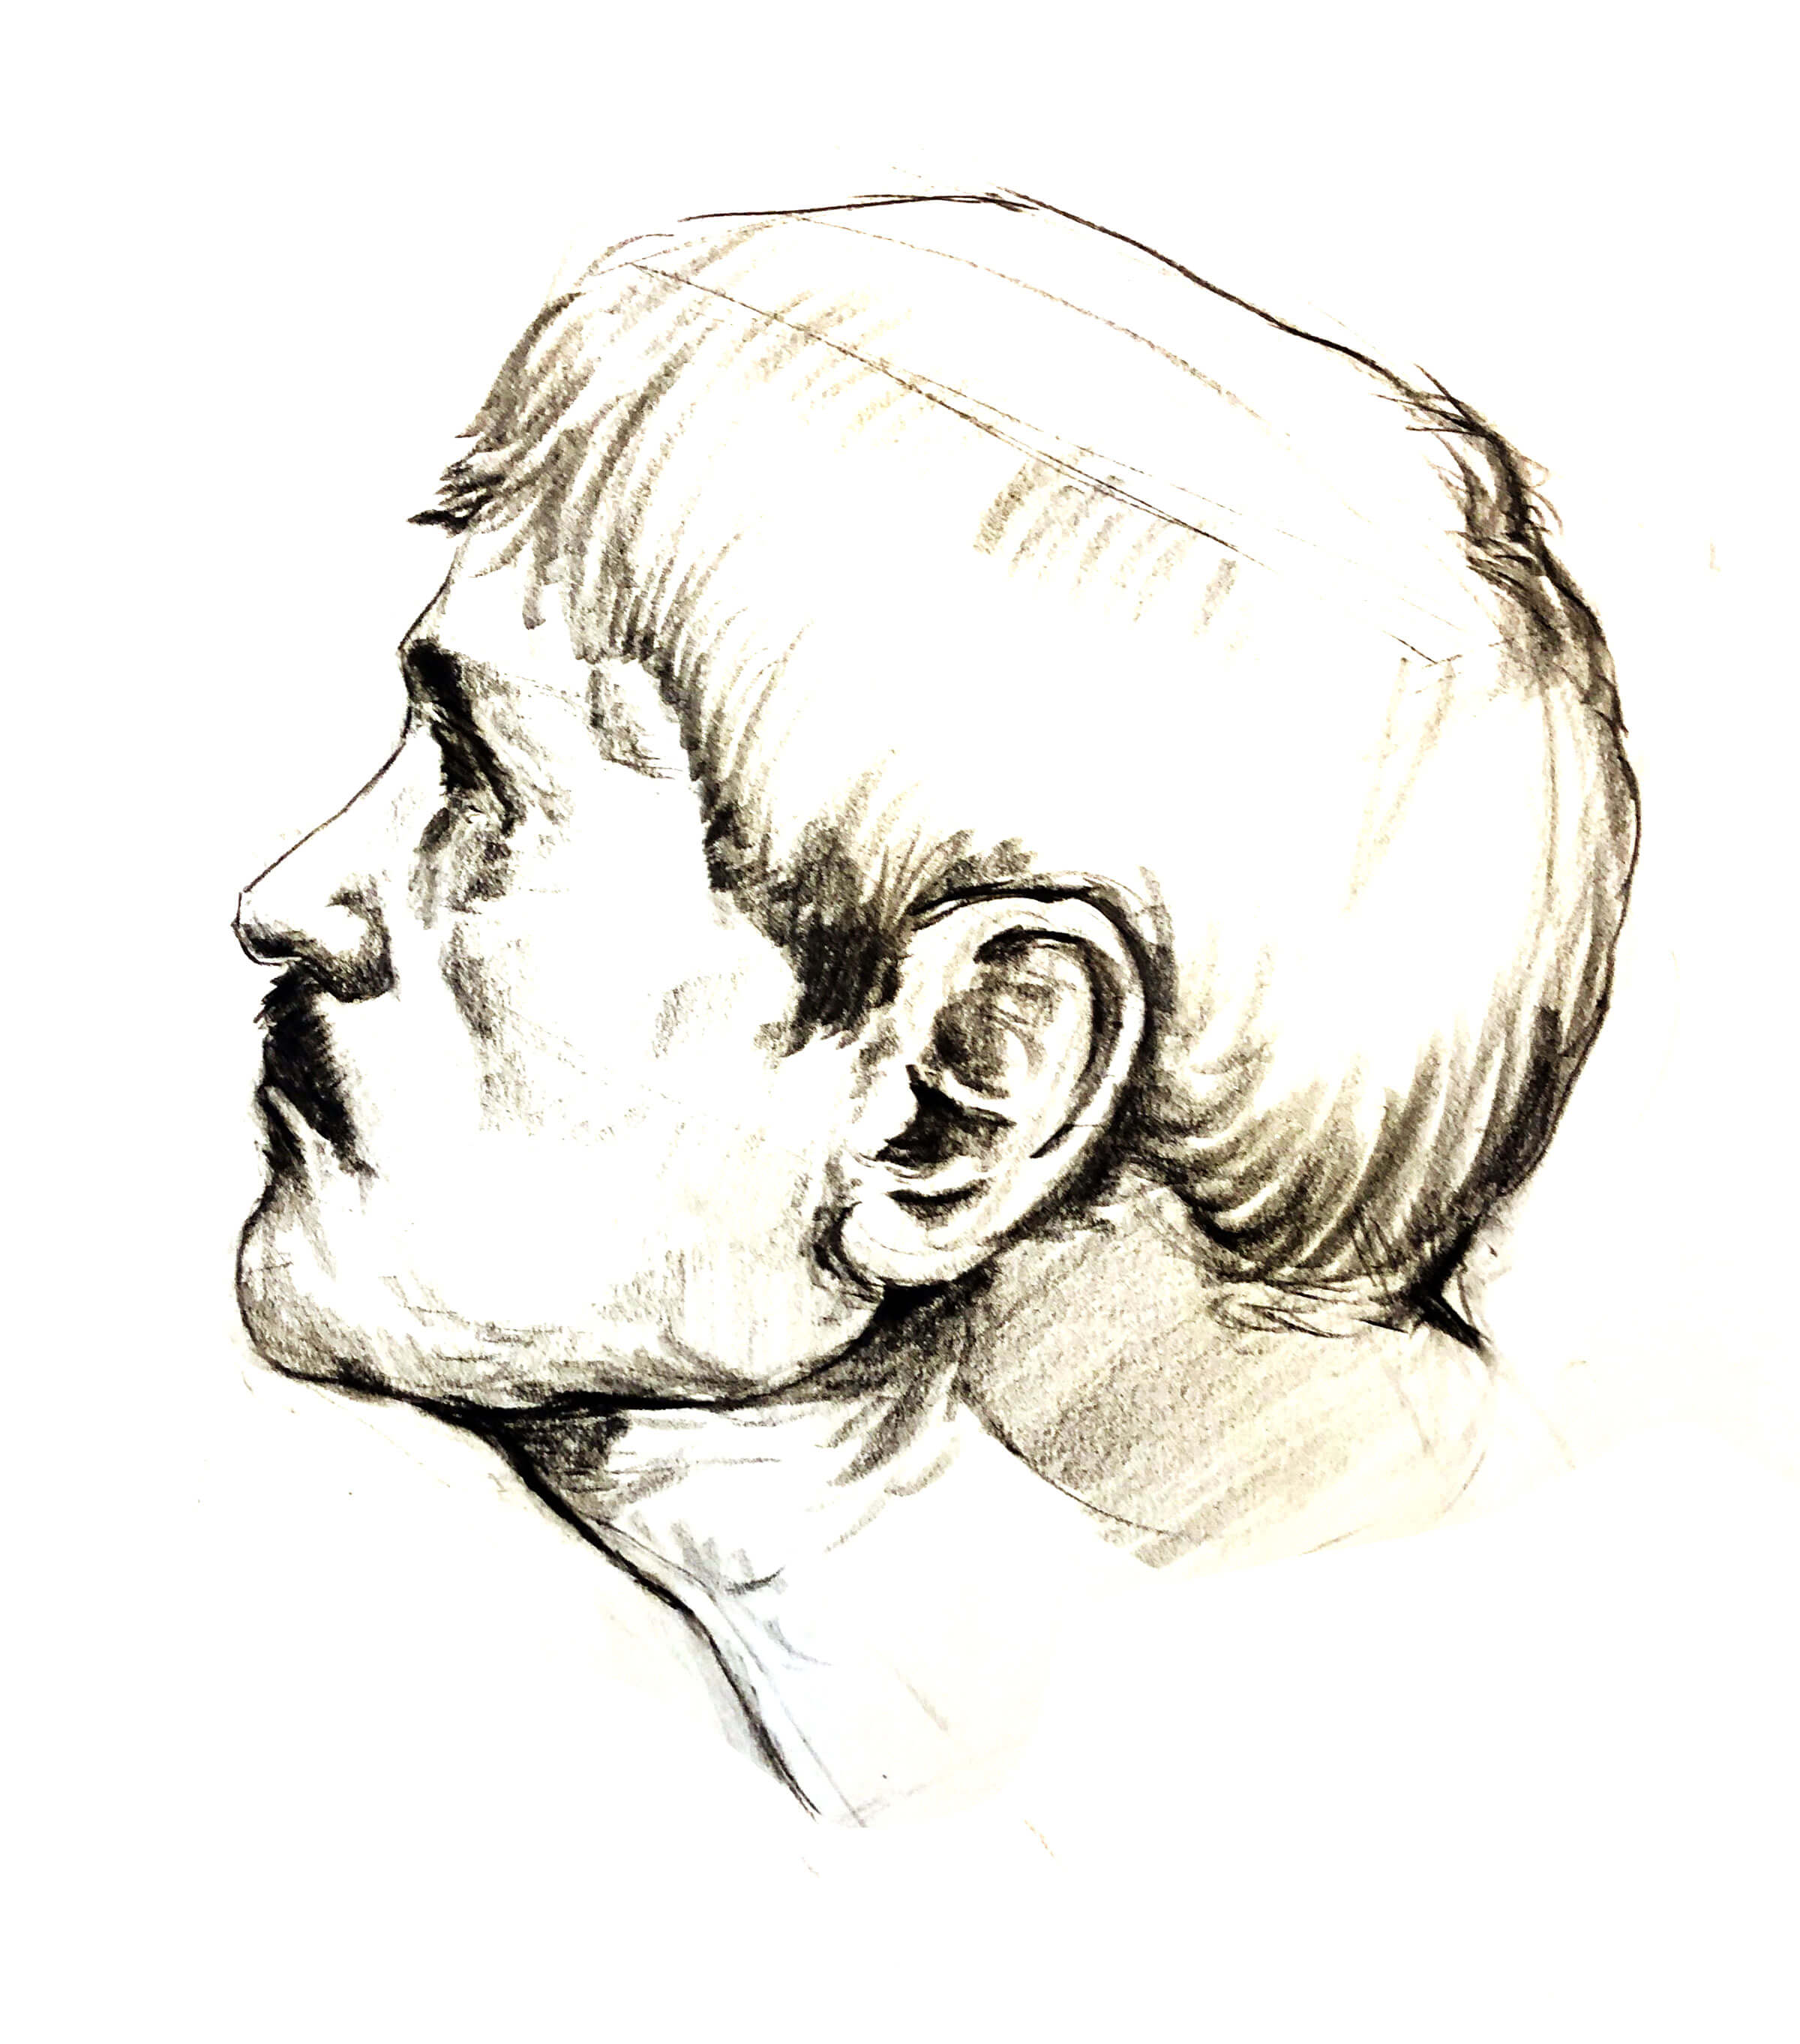 Black-and-white sketch of a mustached man looking up and to the left, away from the viewer.